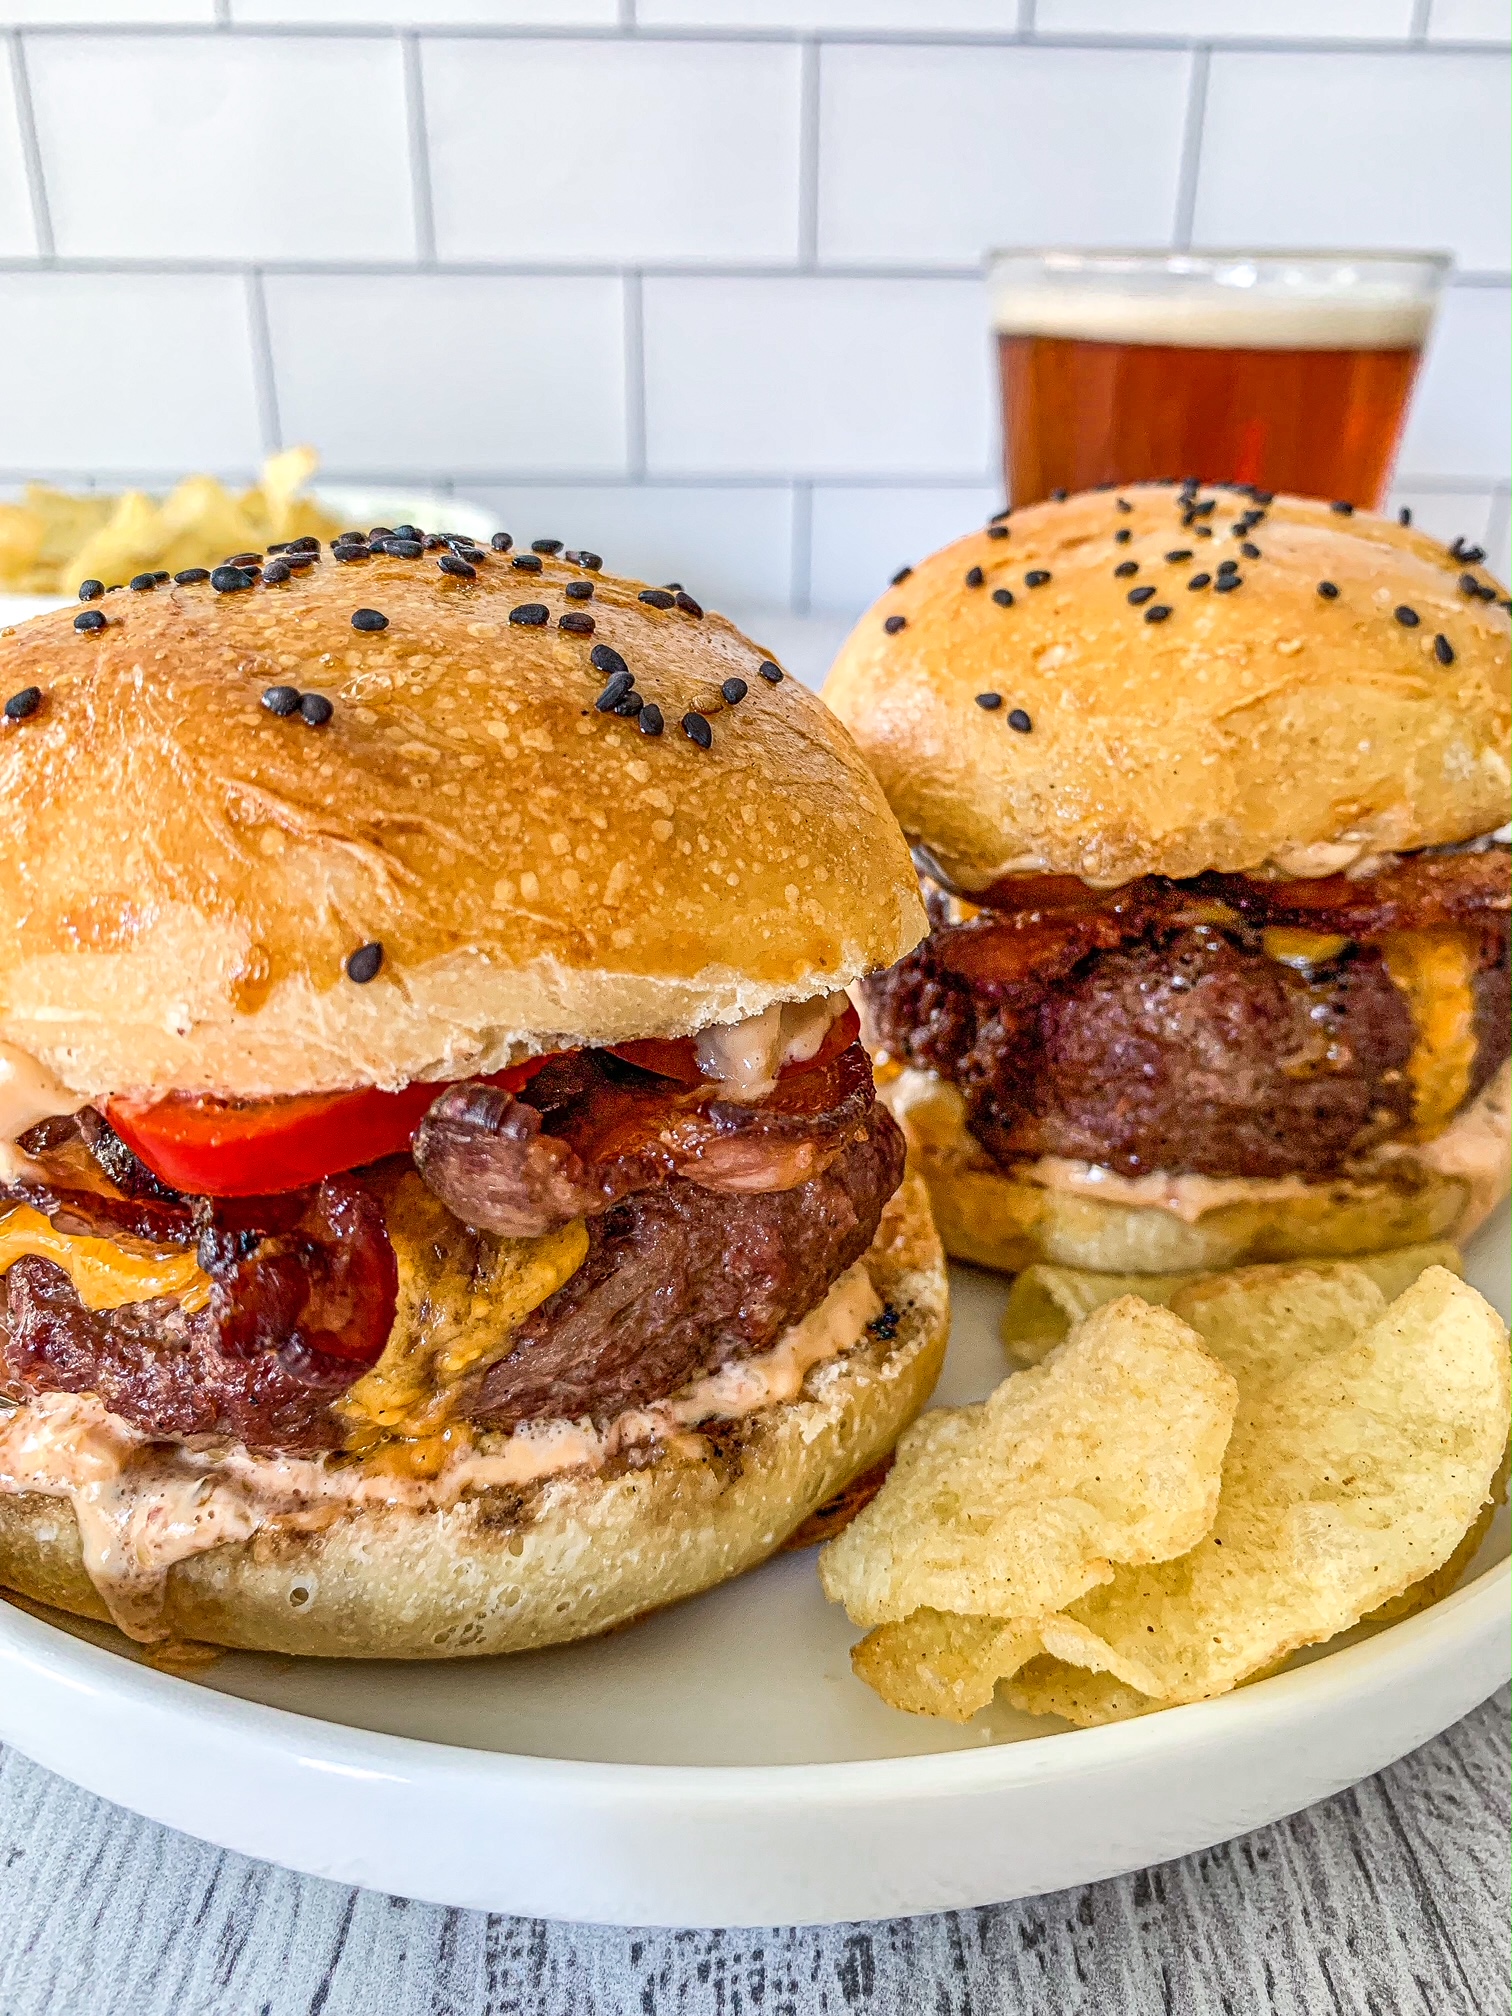 Two Smoked Burgers on hamburger buns with chips and a beer next to them.